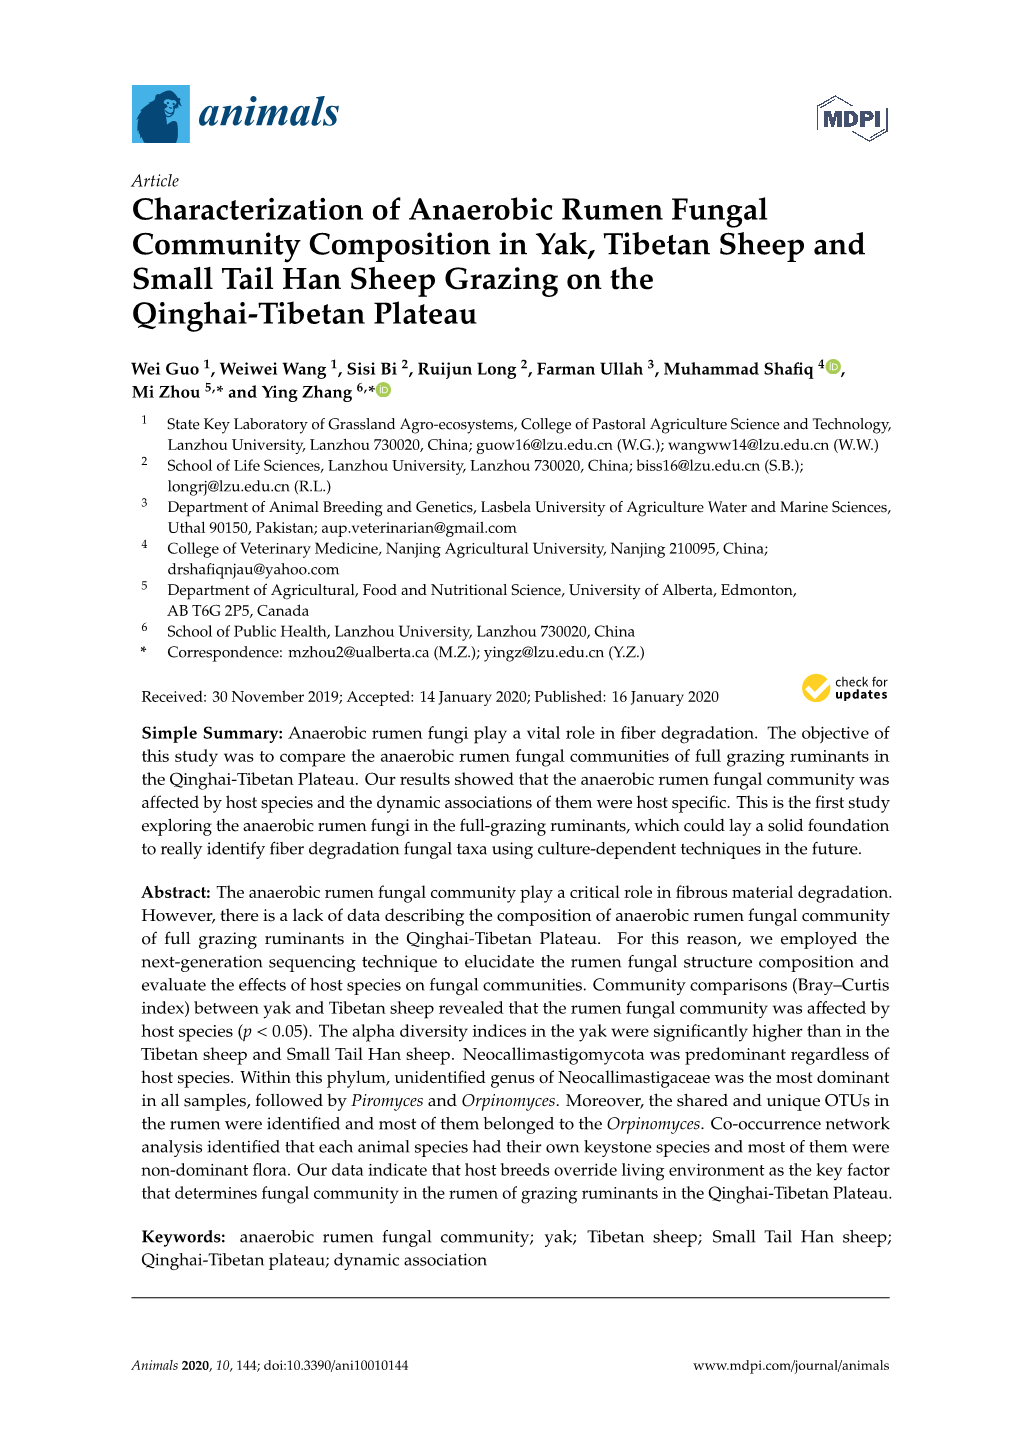 Characterization of Anaerobic Rumen Fungal Community Composition in Yak, Tibetan Sheep and Small Tail Han Sheep Grazing on the Qinghai-Tibetan Plateau